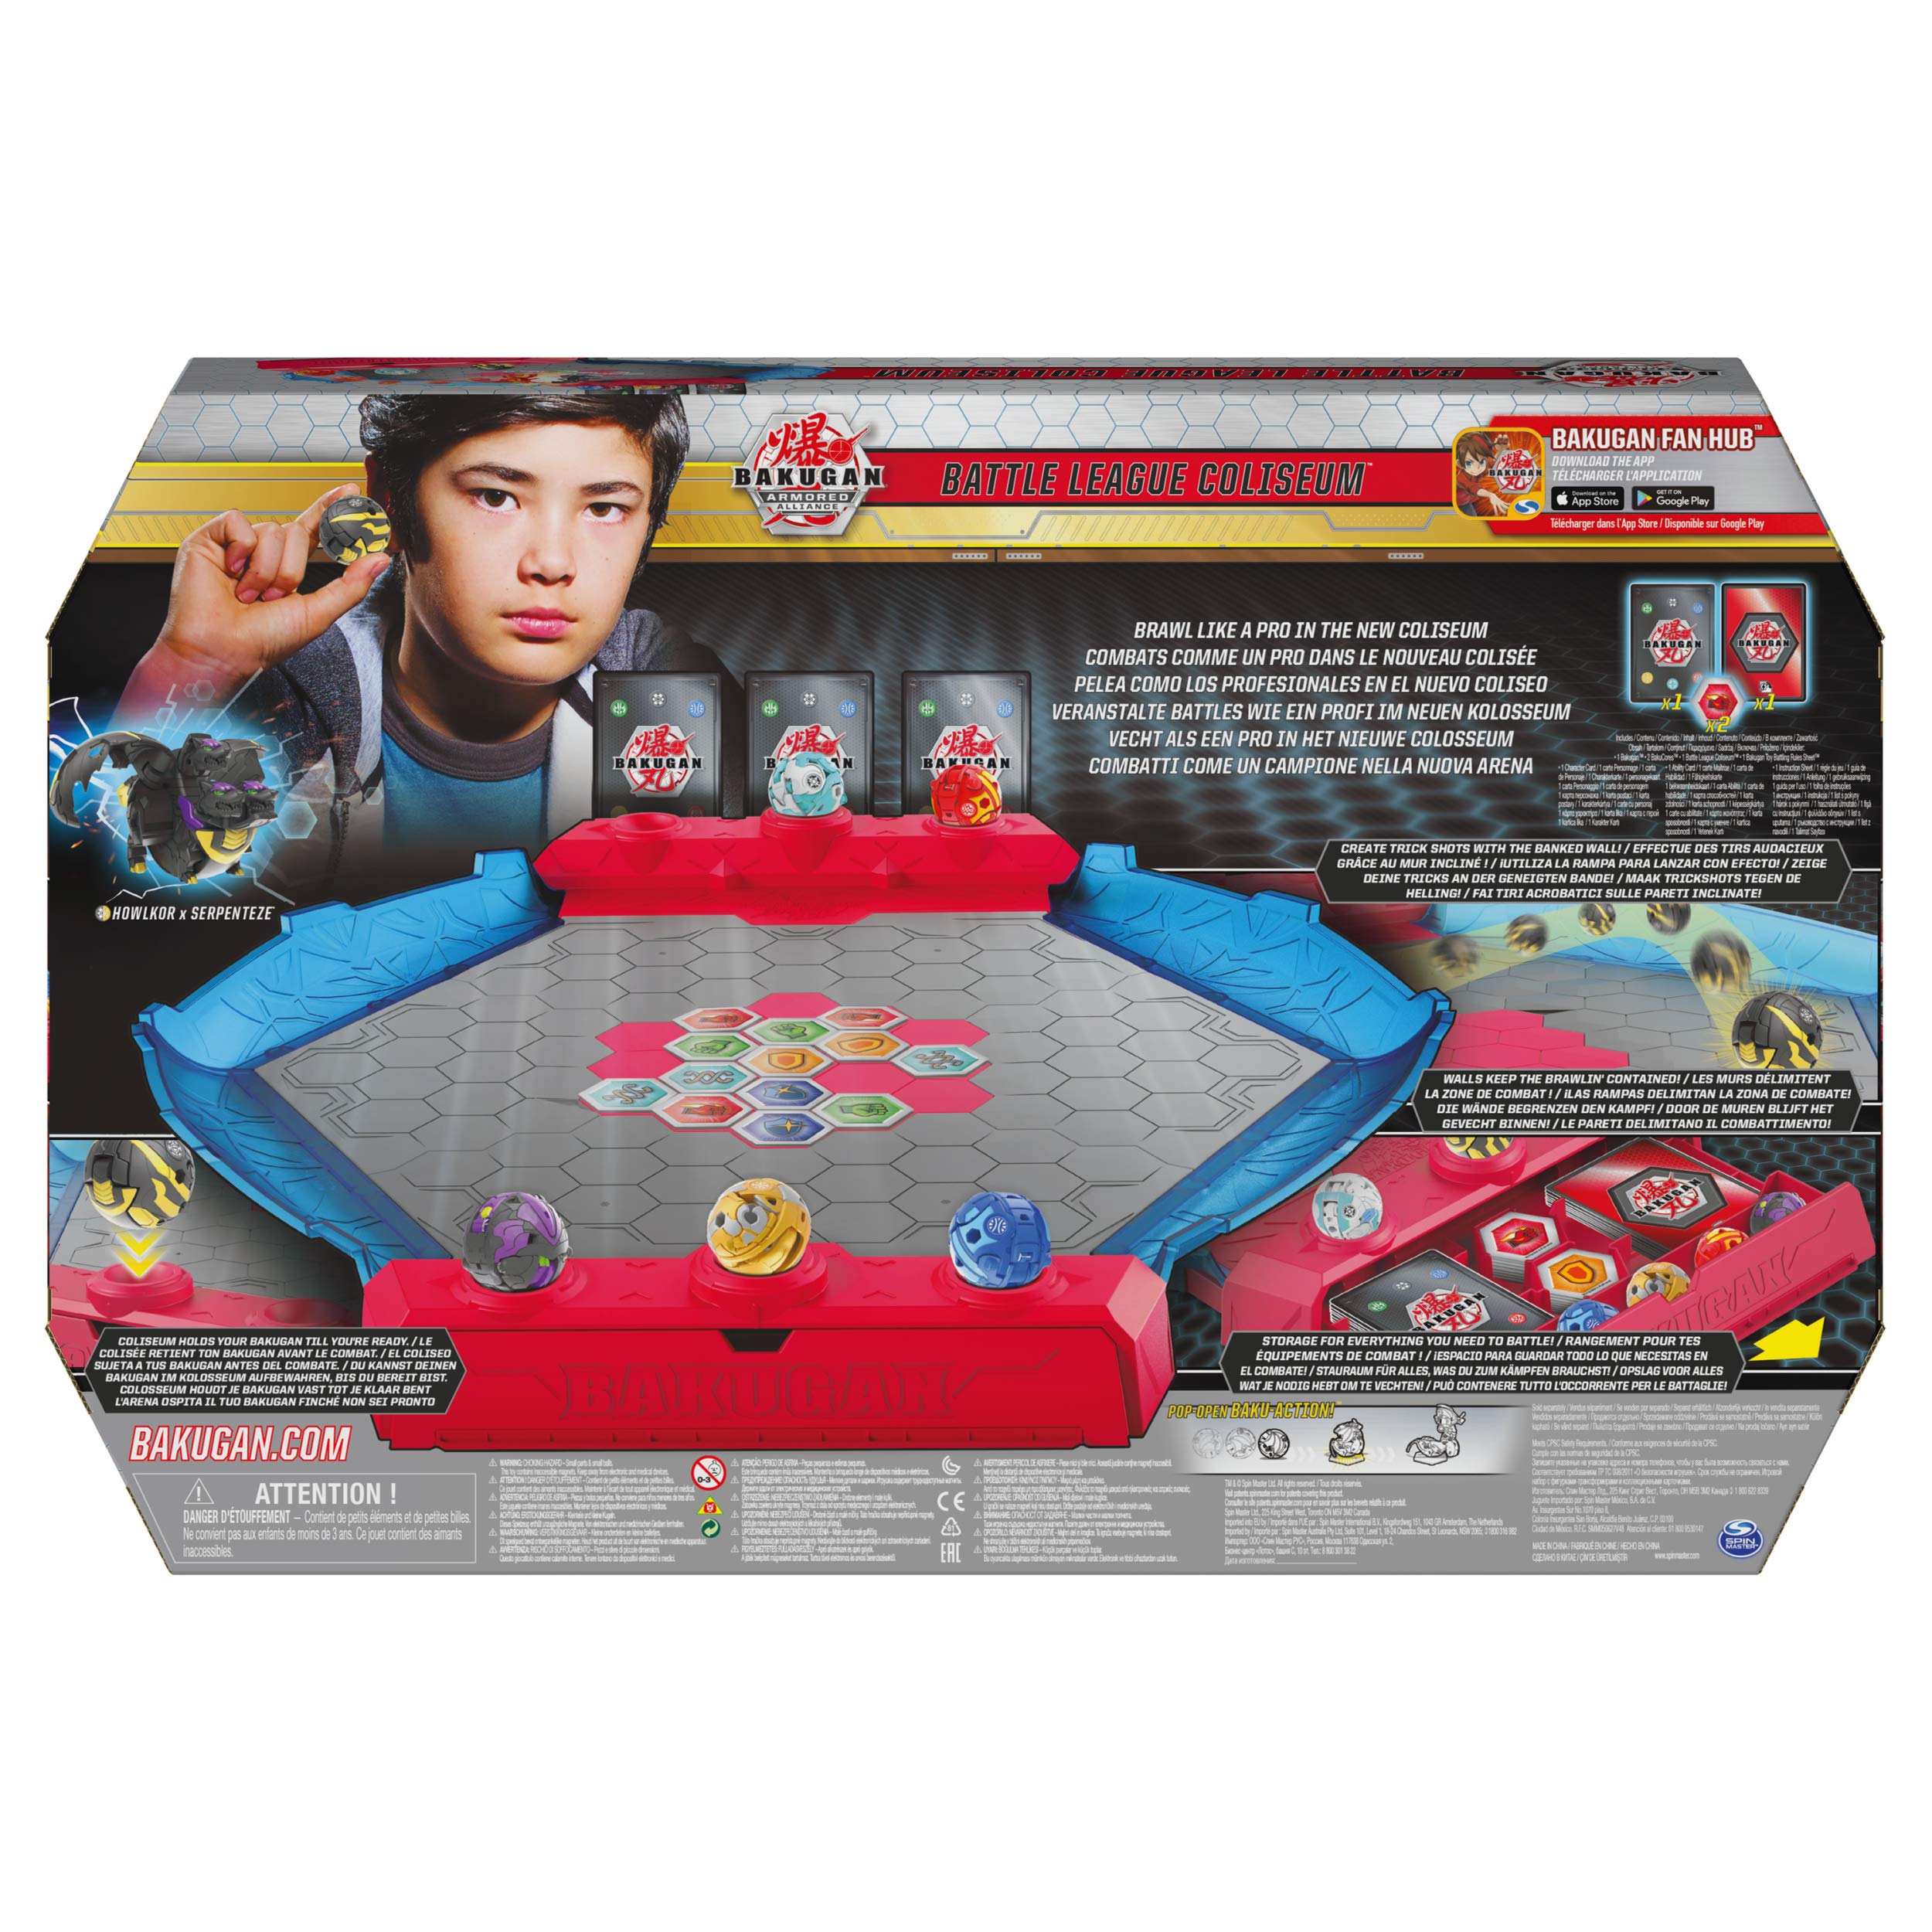 Bakugan Battle League Coliseum, Deluxe Game Board with Exclusive Fused Howlkor x Serpenteze, Kids Toys for Boys Ages 6 and Up